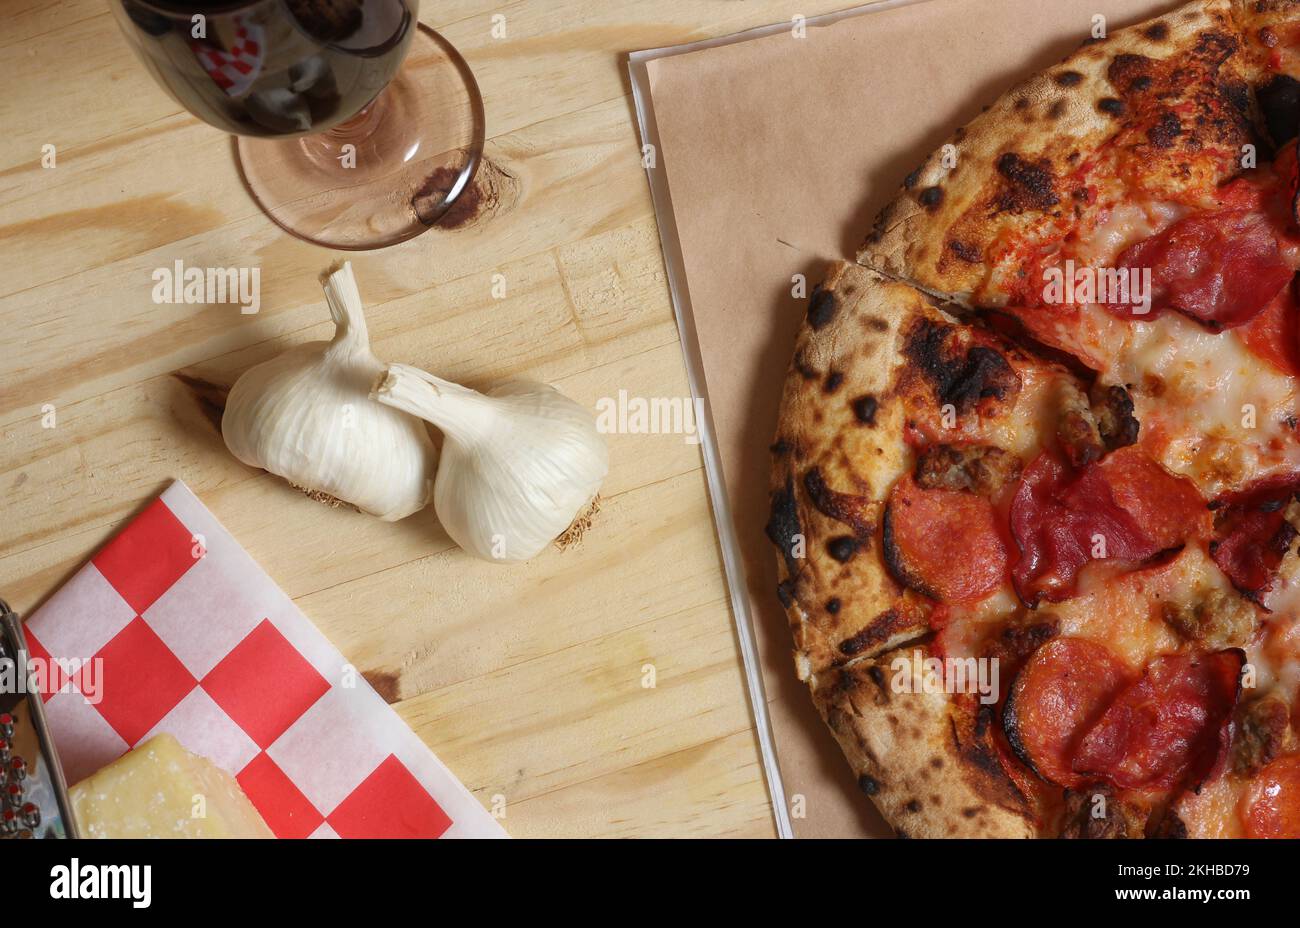 Fresh Pizza on Wooden Table at Restaurant Sliced and Ready to Enjoy Stock Photo